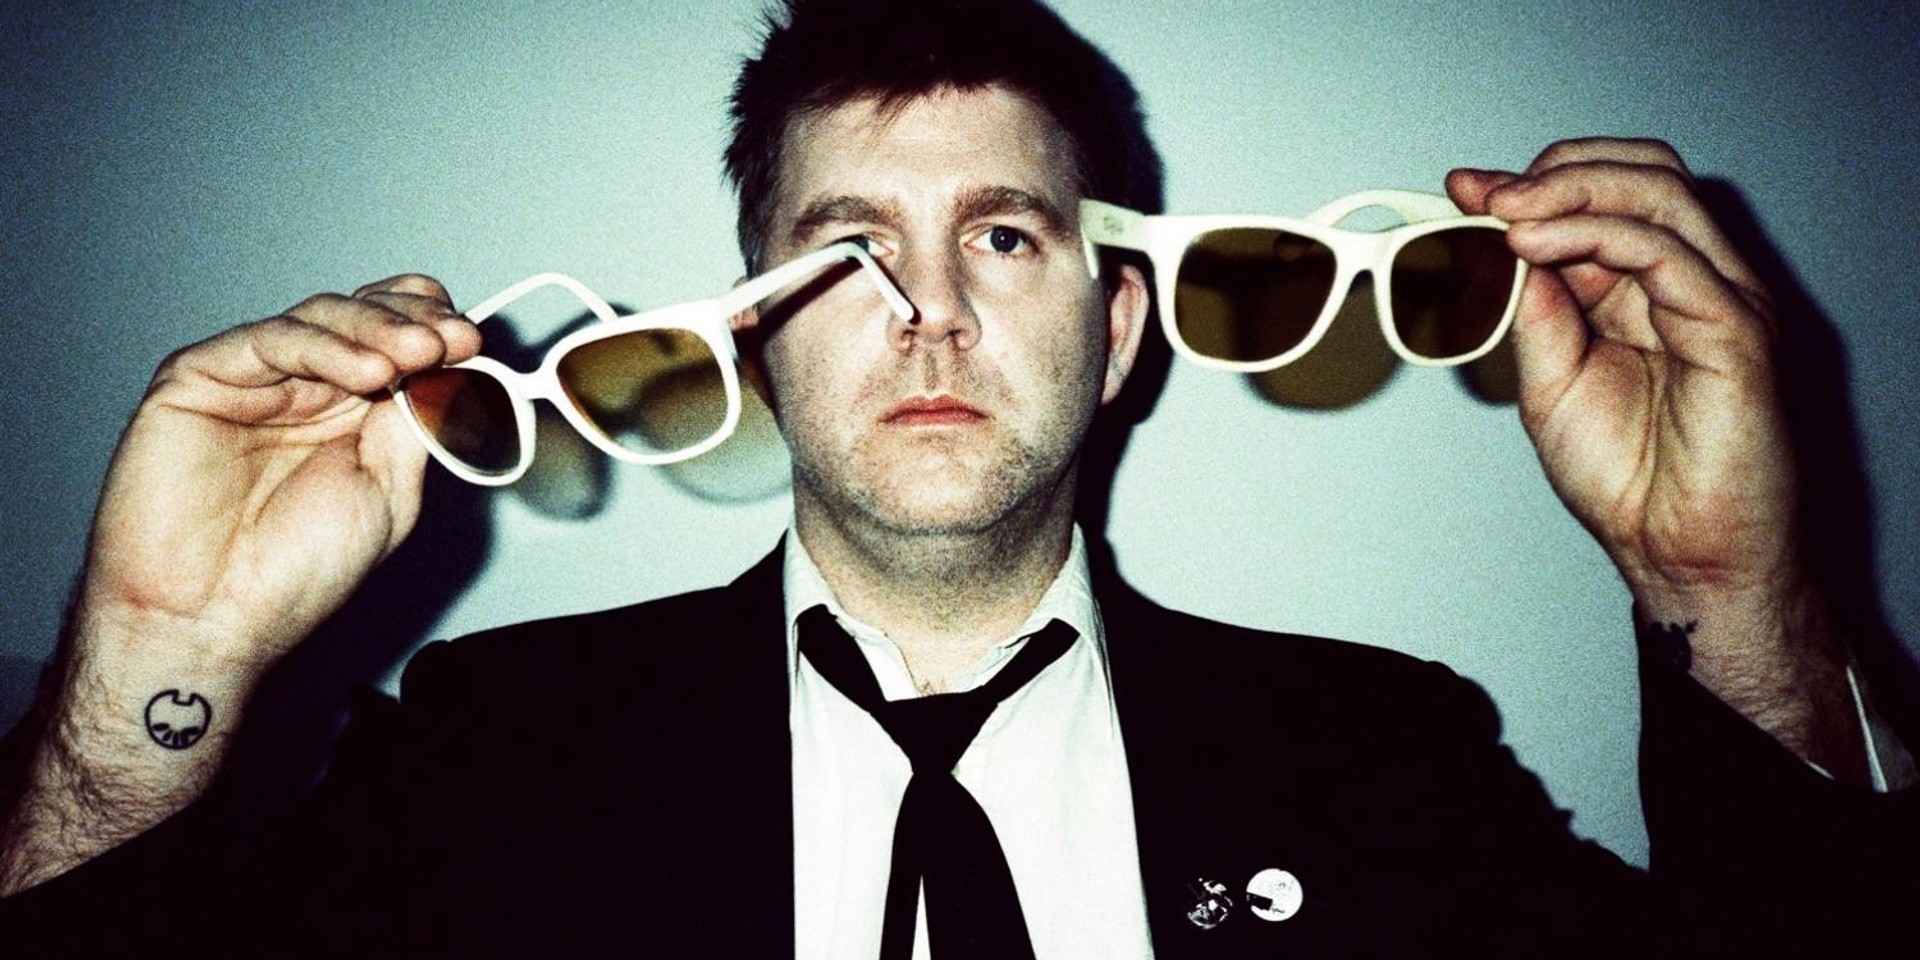 LCD Soundsystem heads to Asia